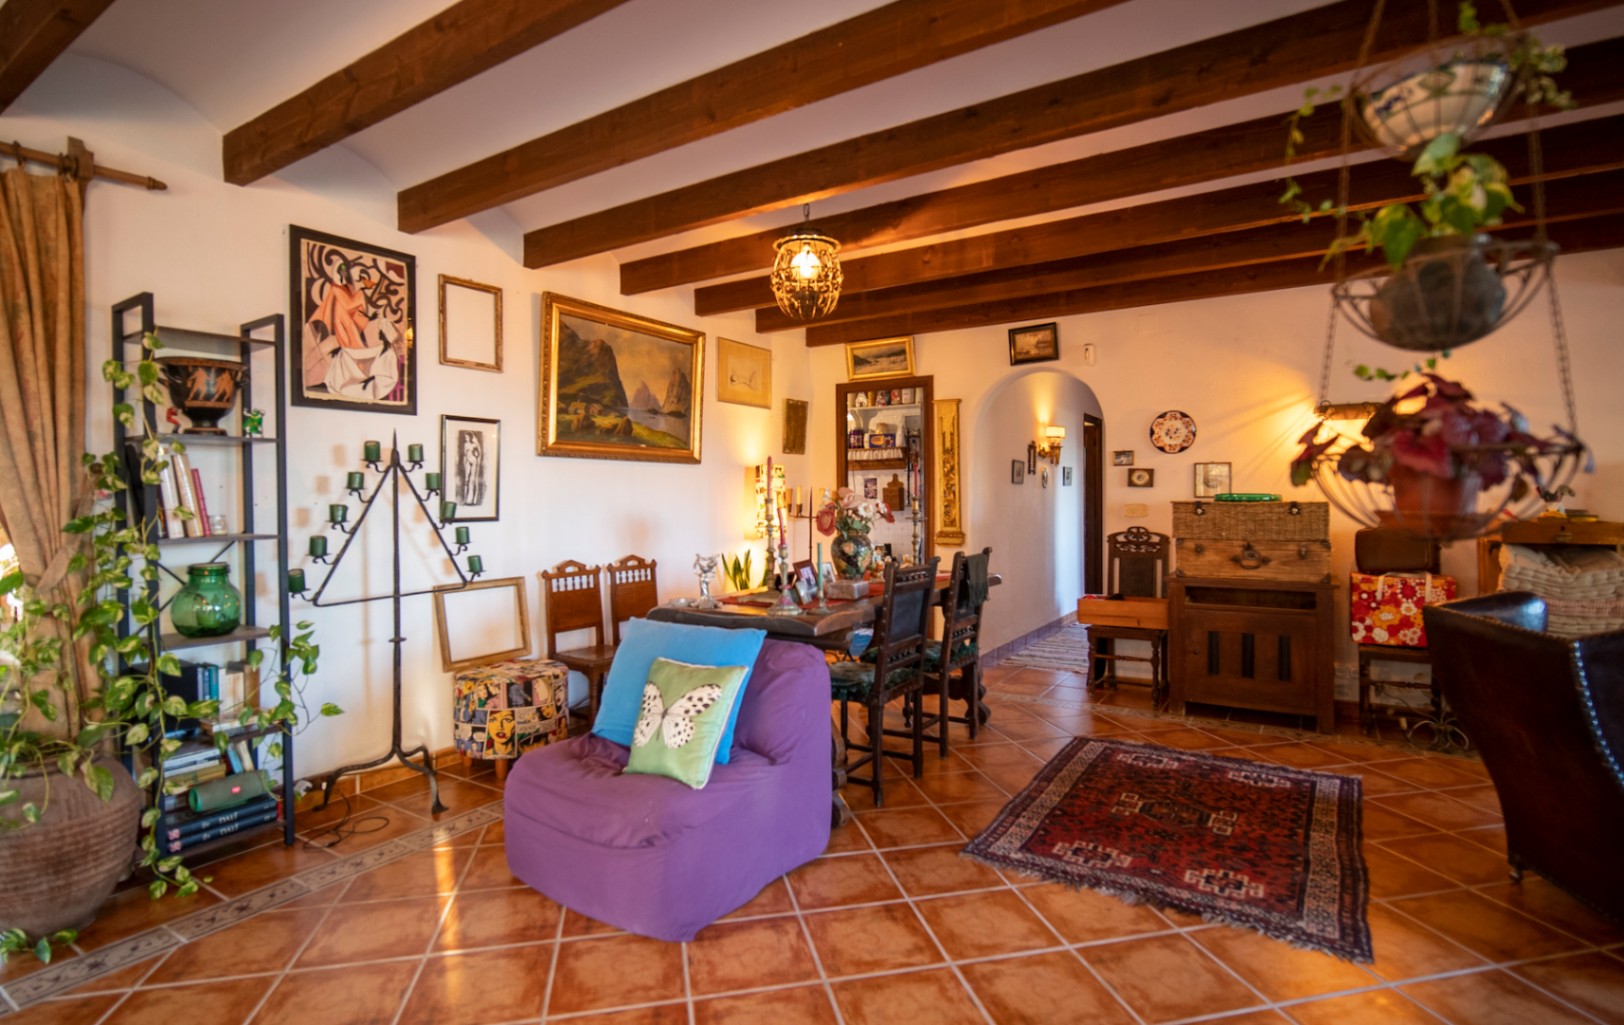 Old Spanish style villa with great potential.